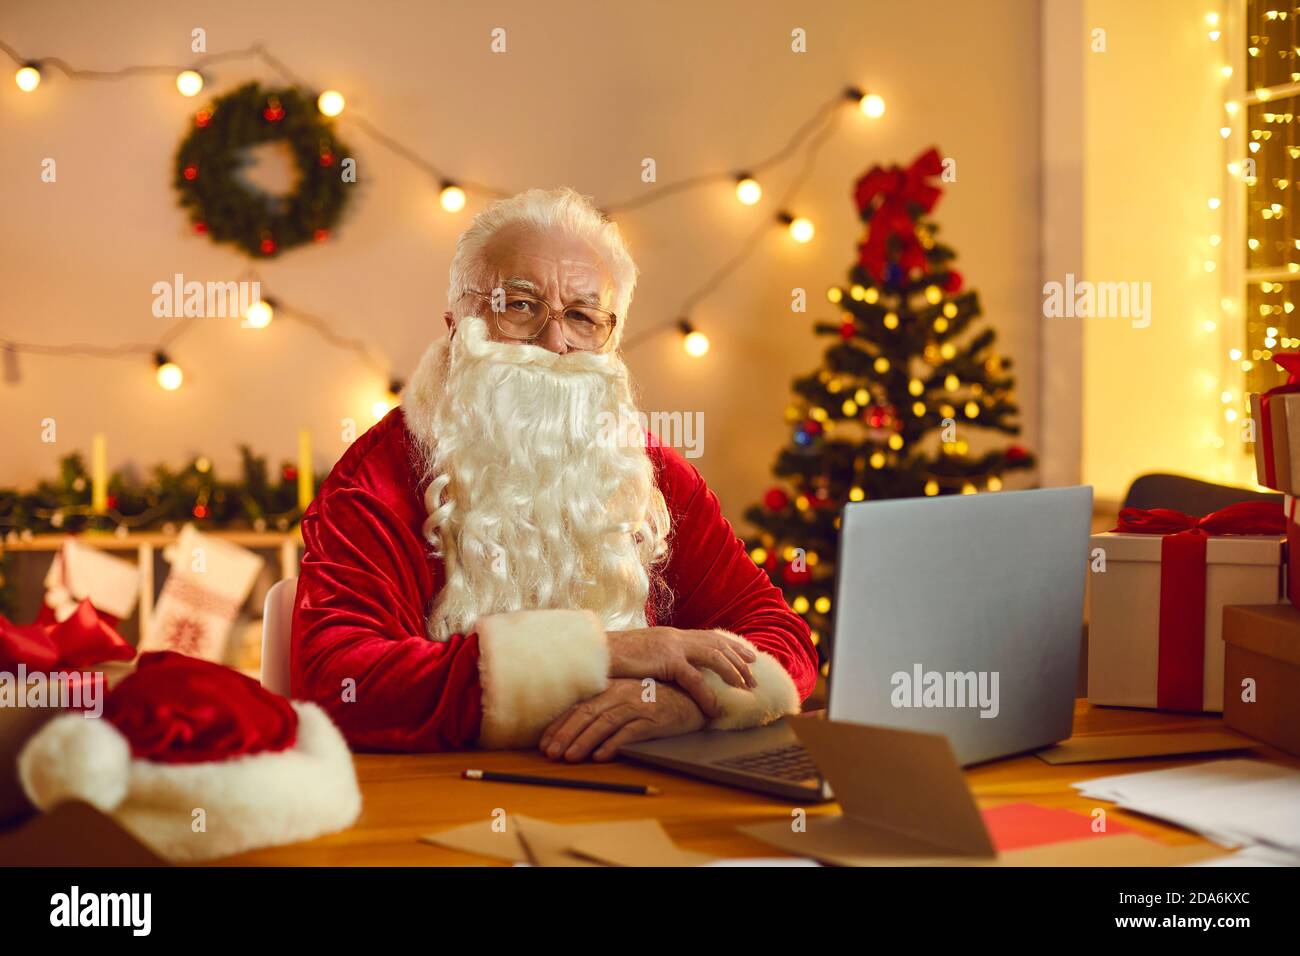 Mature Santa in traditional red costume ready to congratulate online at home Stock Photo